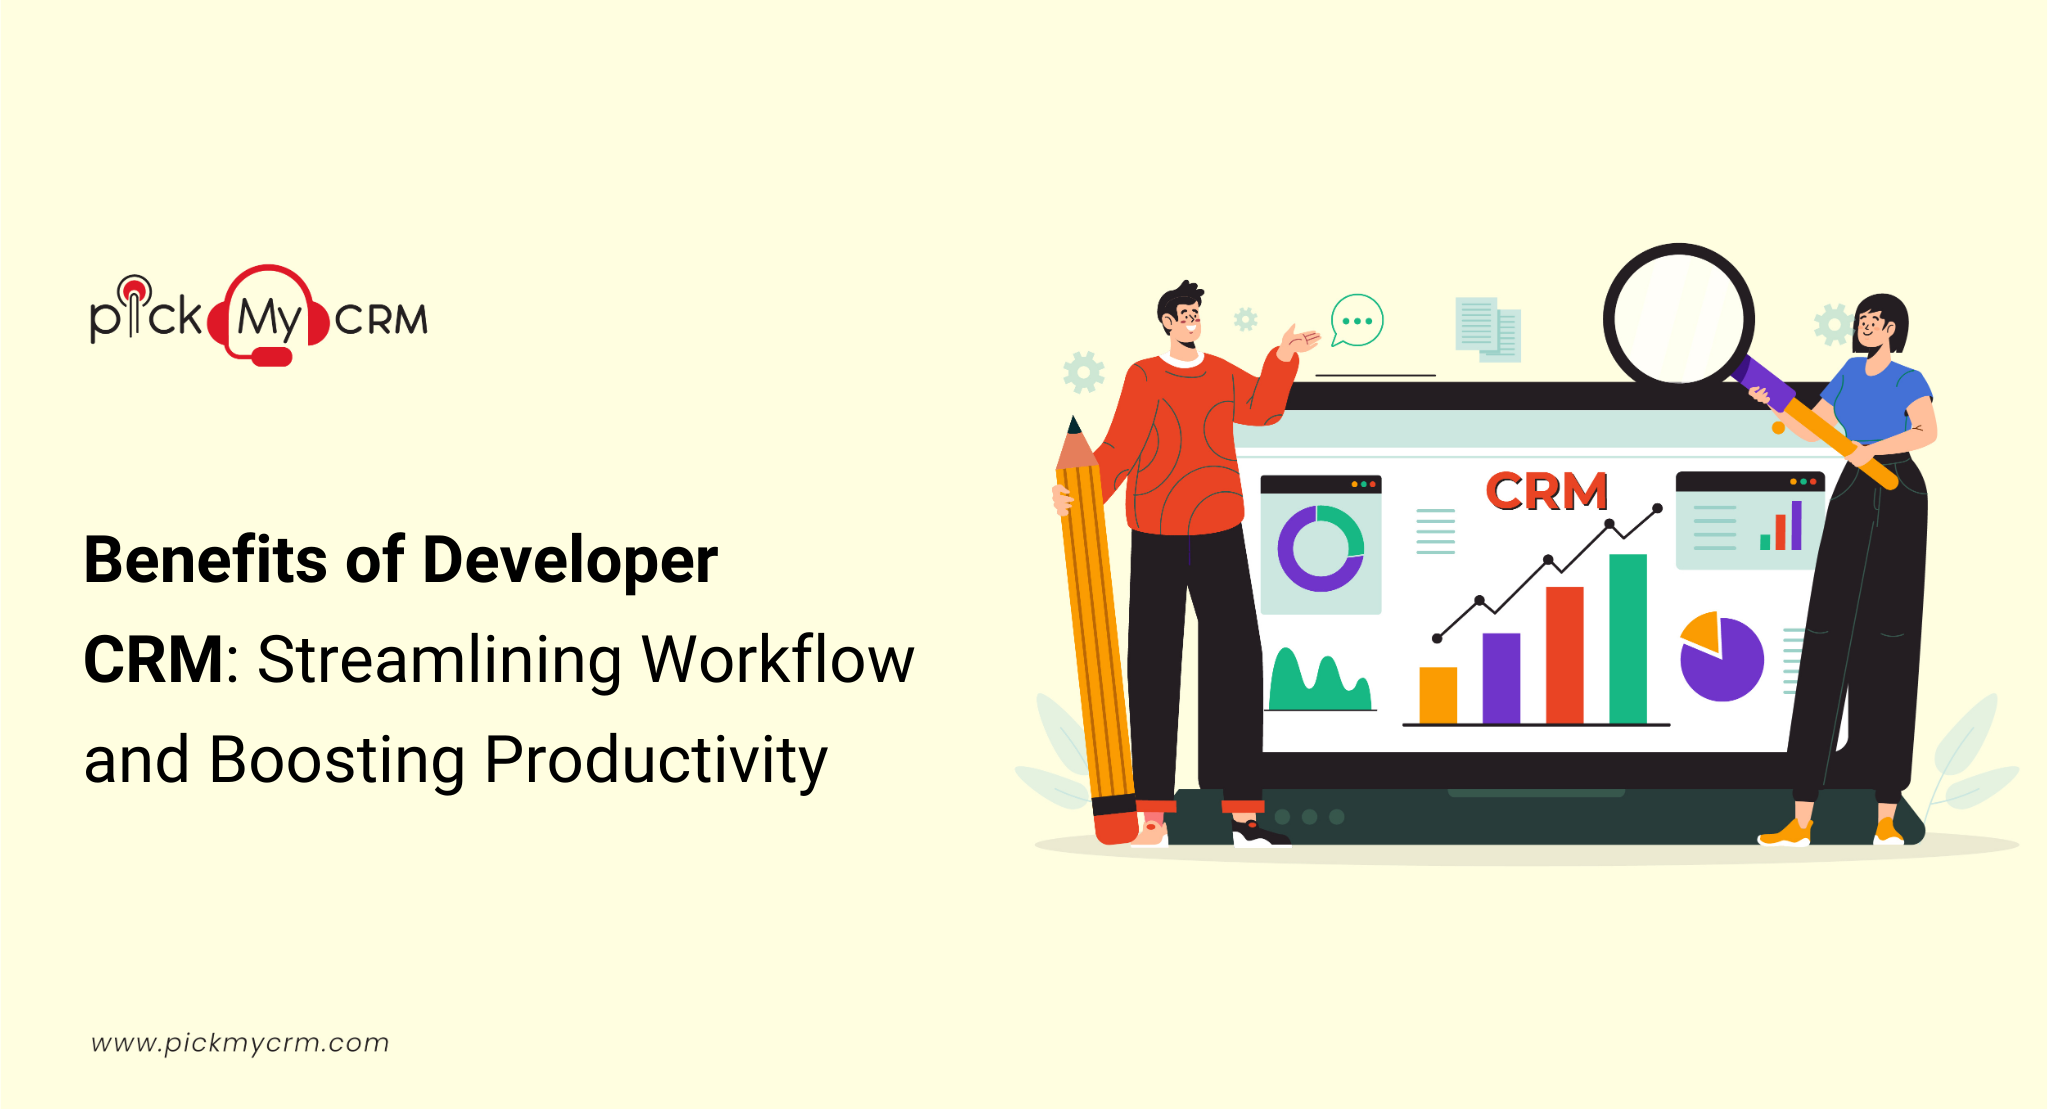 Benefits of Developer CRM: Streamlining Workflow and Boosting Productivity